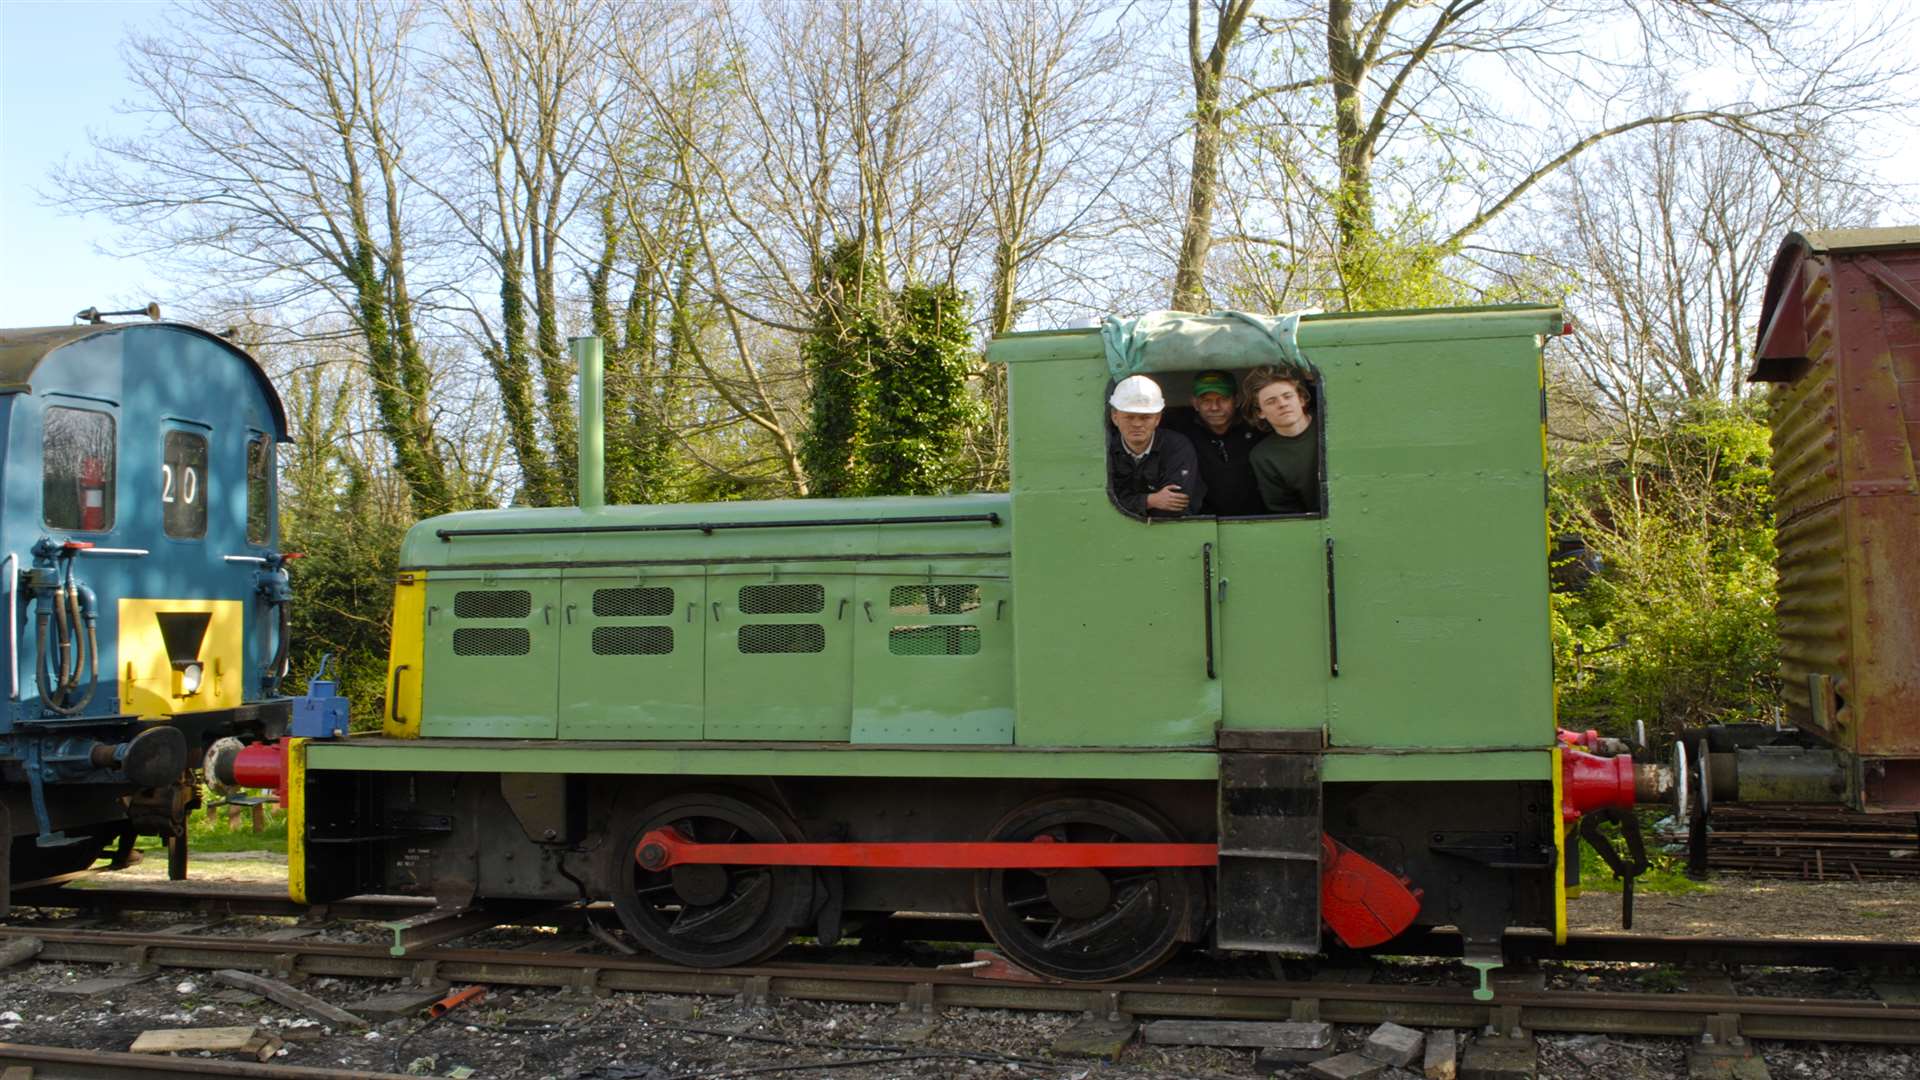 East Kent Railway is gearing up for the rededication of the John Fowler steam engine